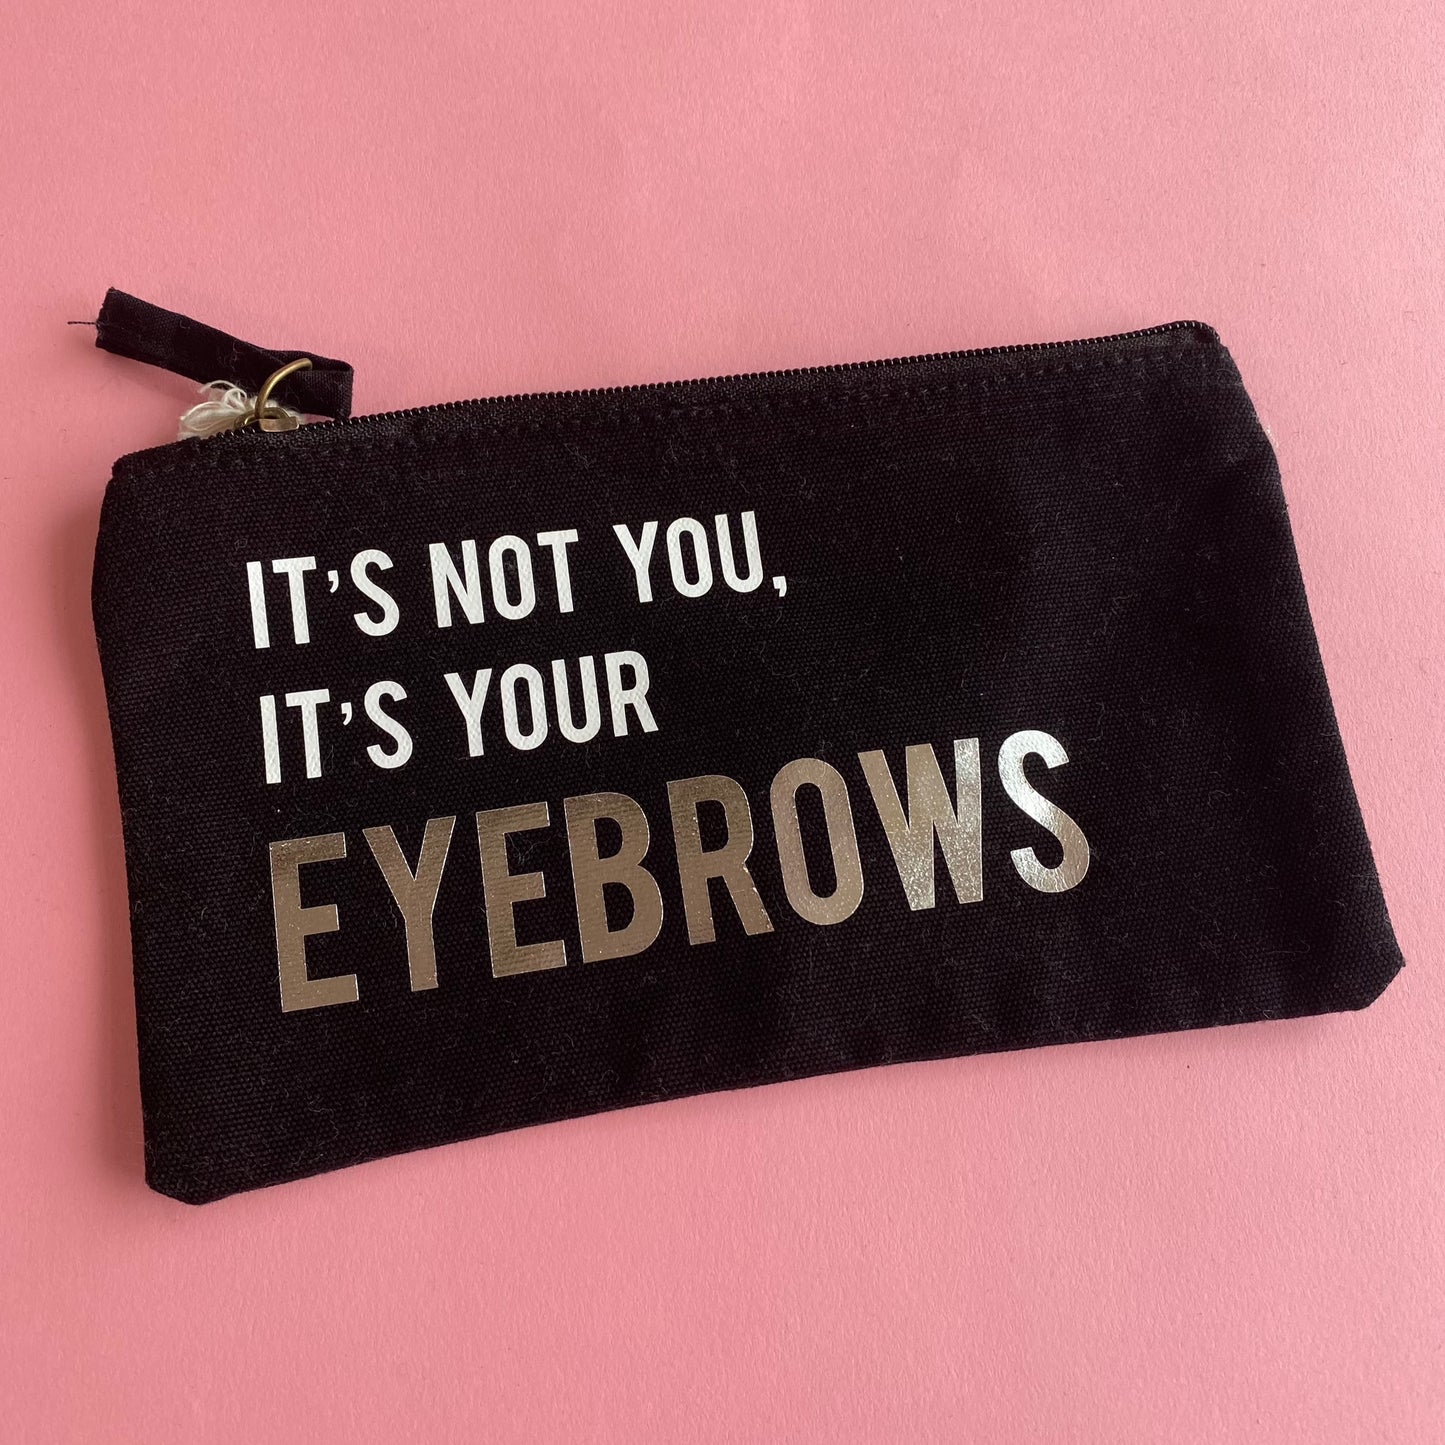 It's Not You It's Your Eyebrows - Black Small Make Up Bag SALE